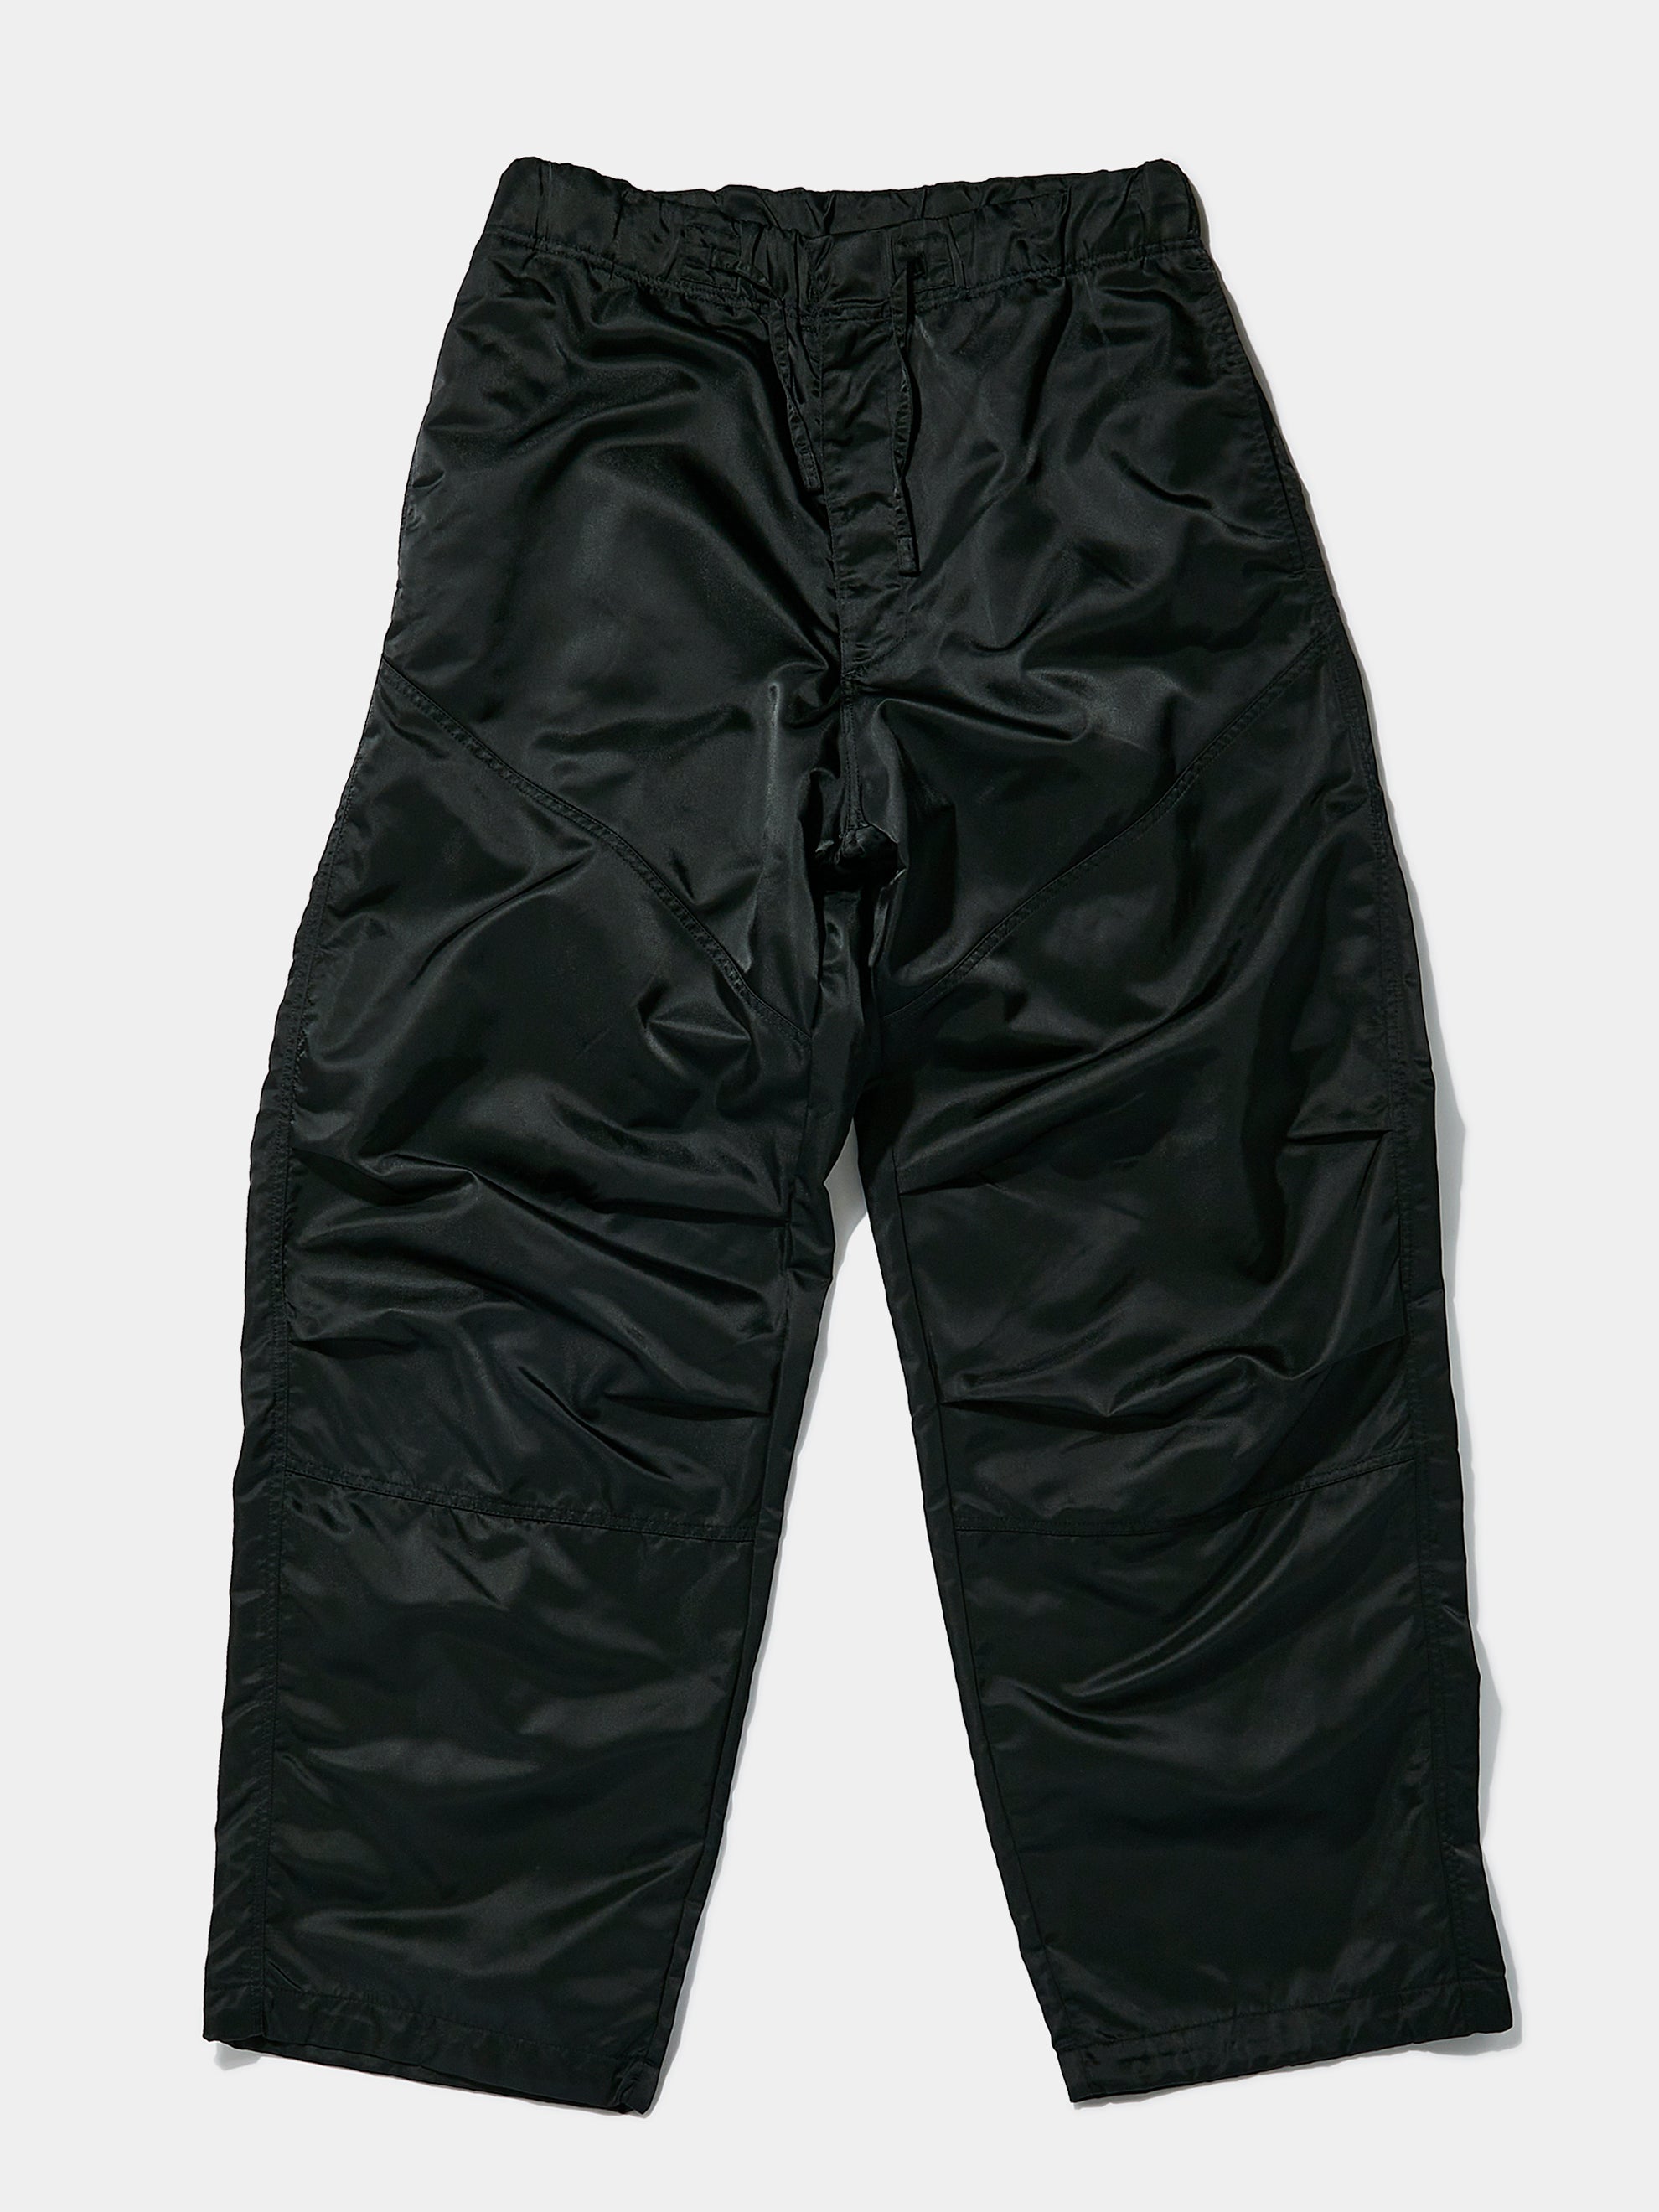 Buy Oamc PROVO PANT (Black) Online at UNION LOS ANGELES